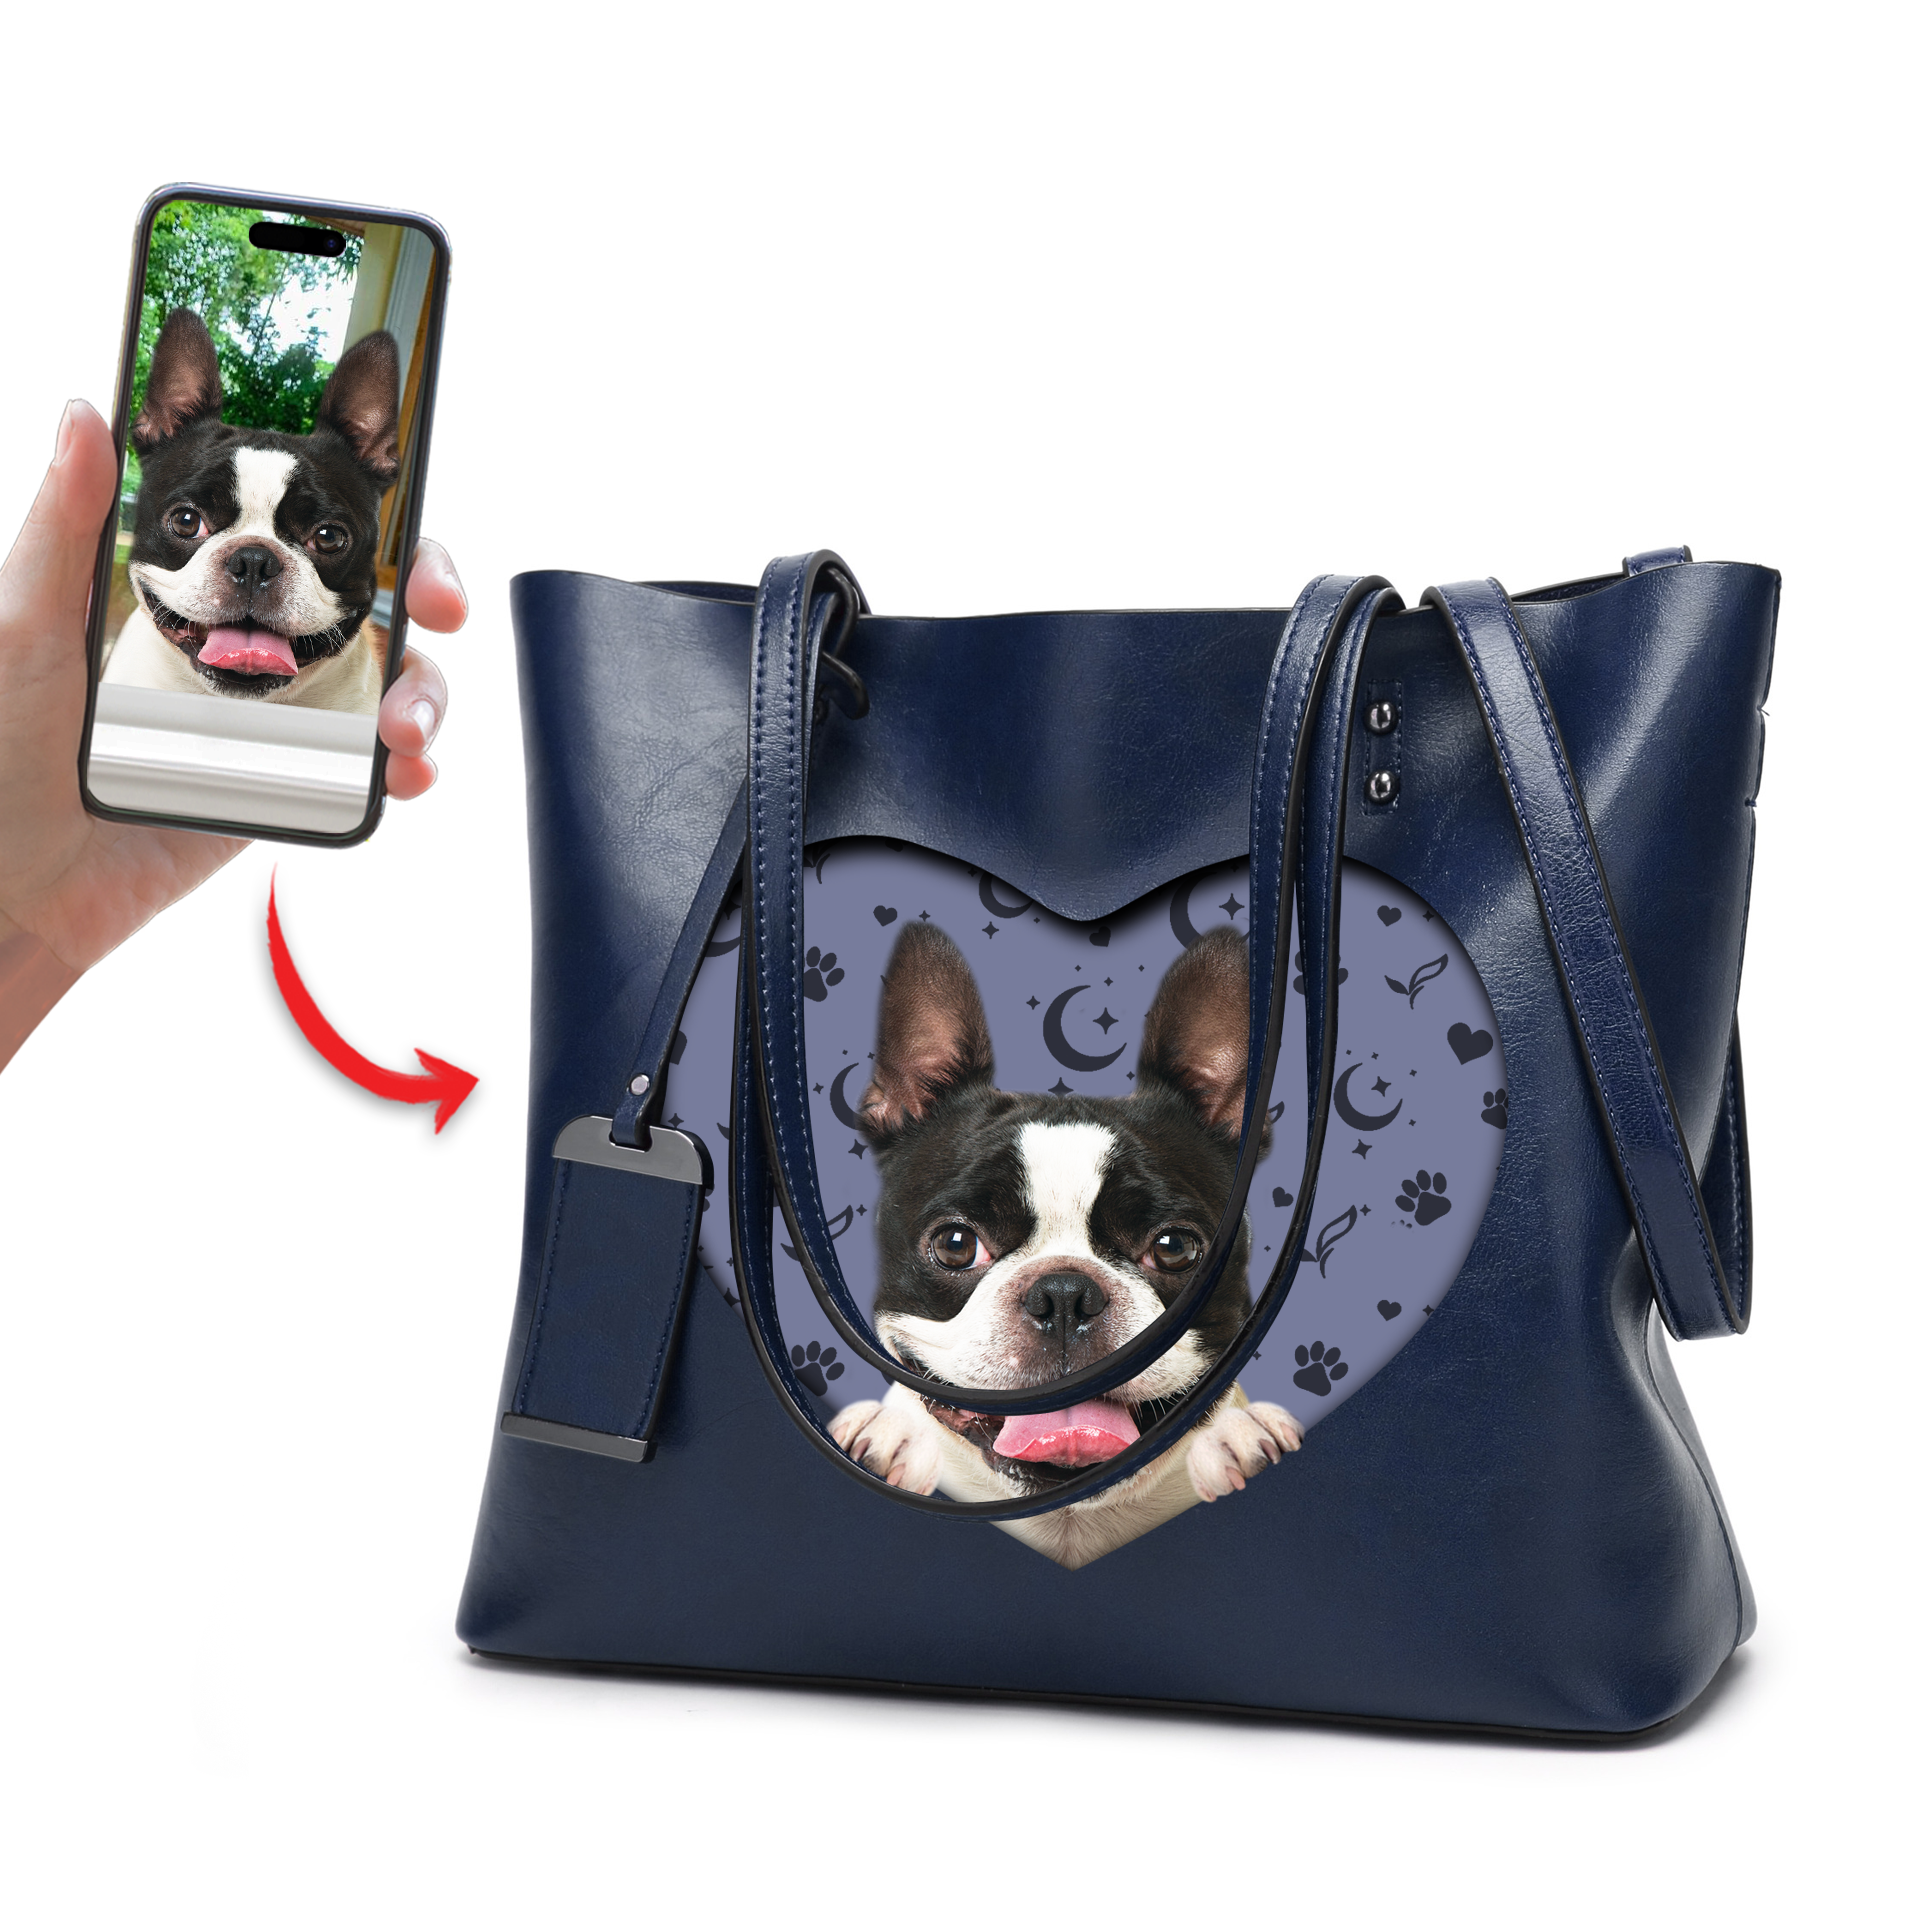 I Know I'm Cute - Personalized Glamour Handbag With Your Photo - 12